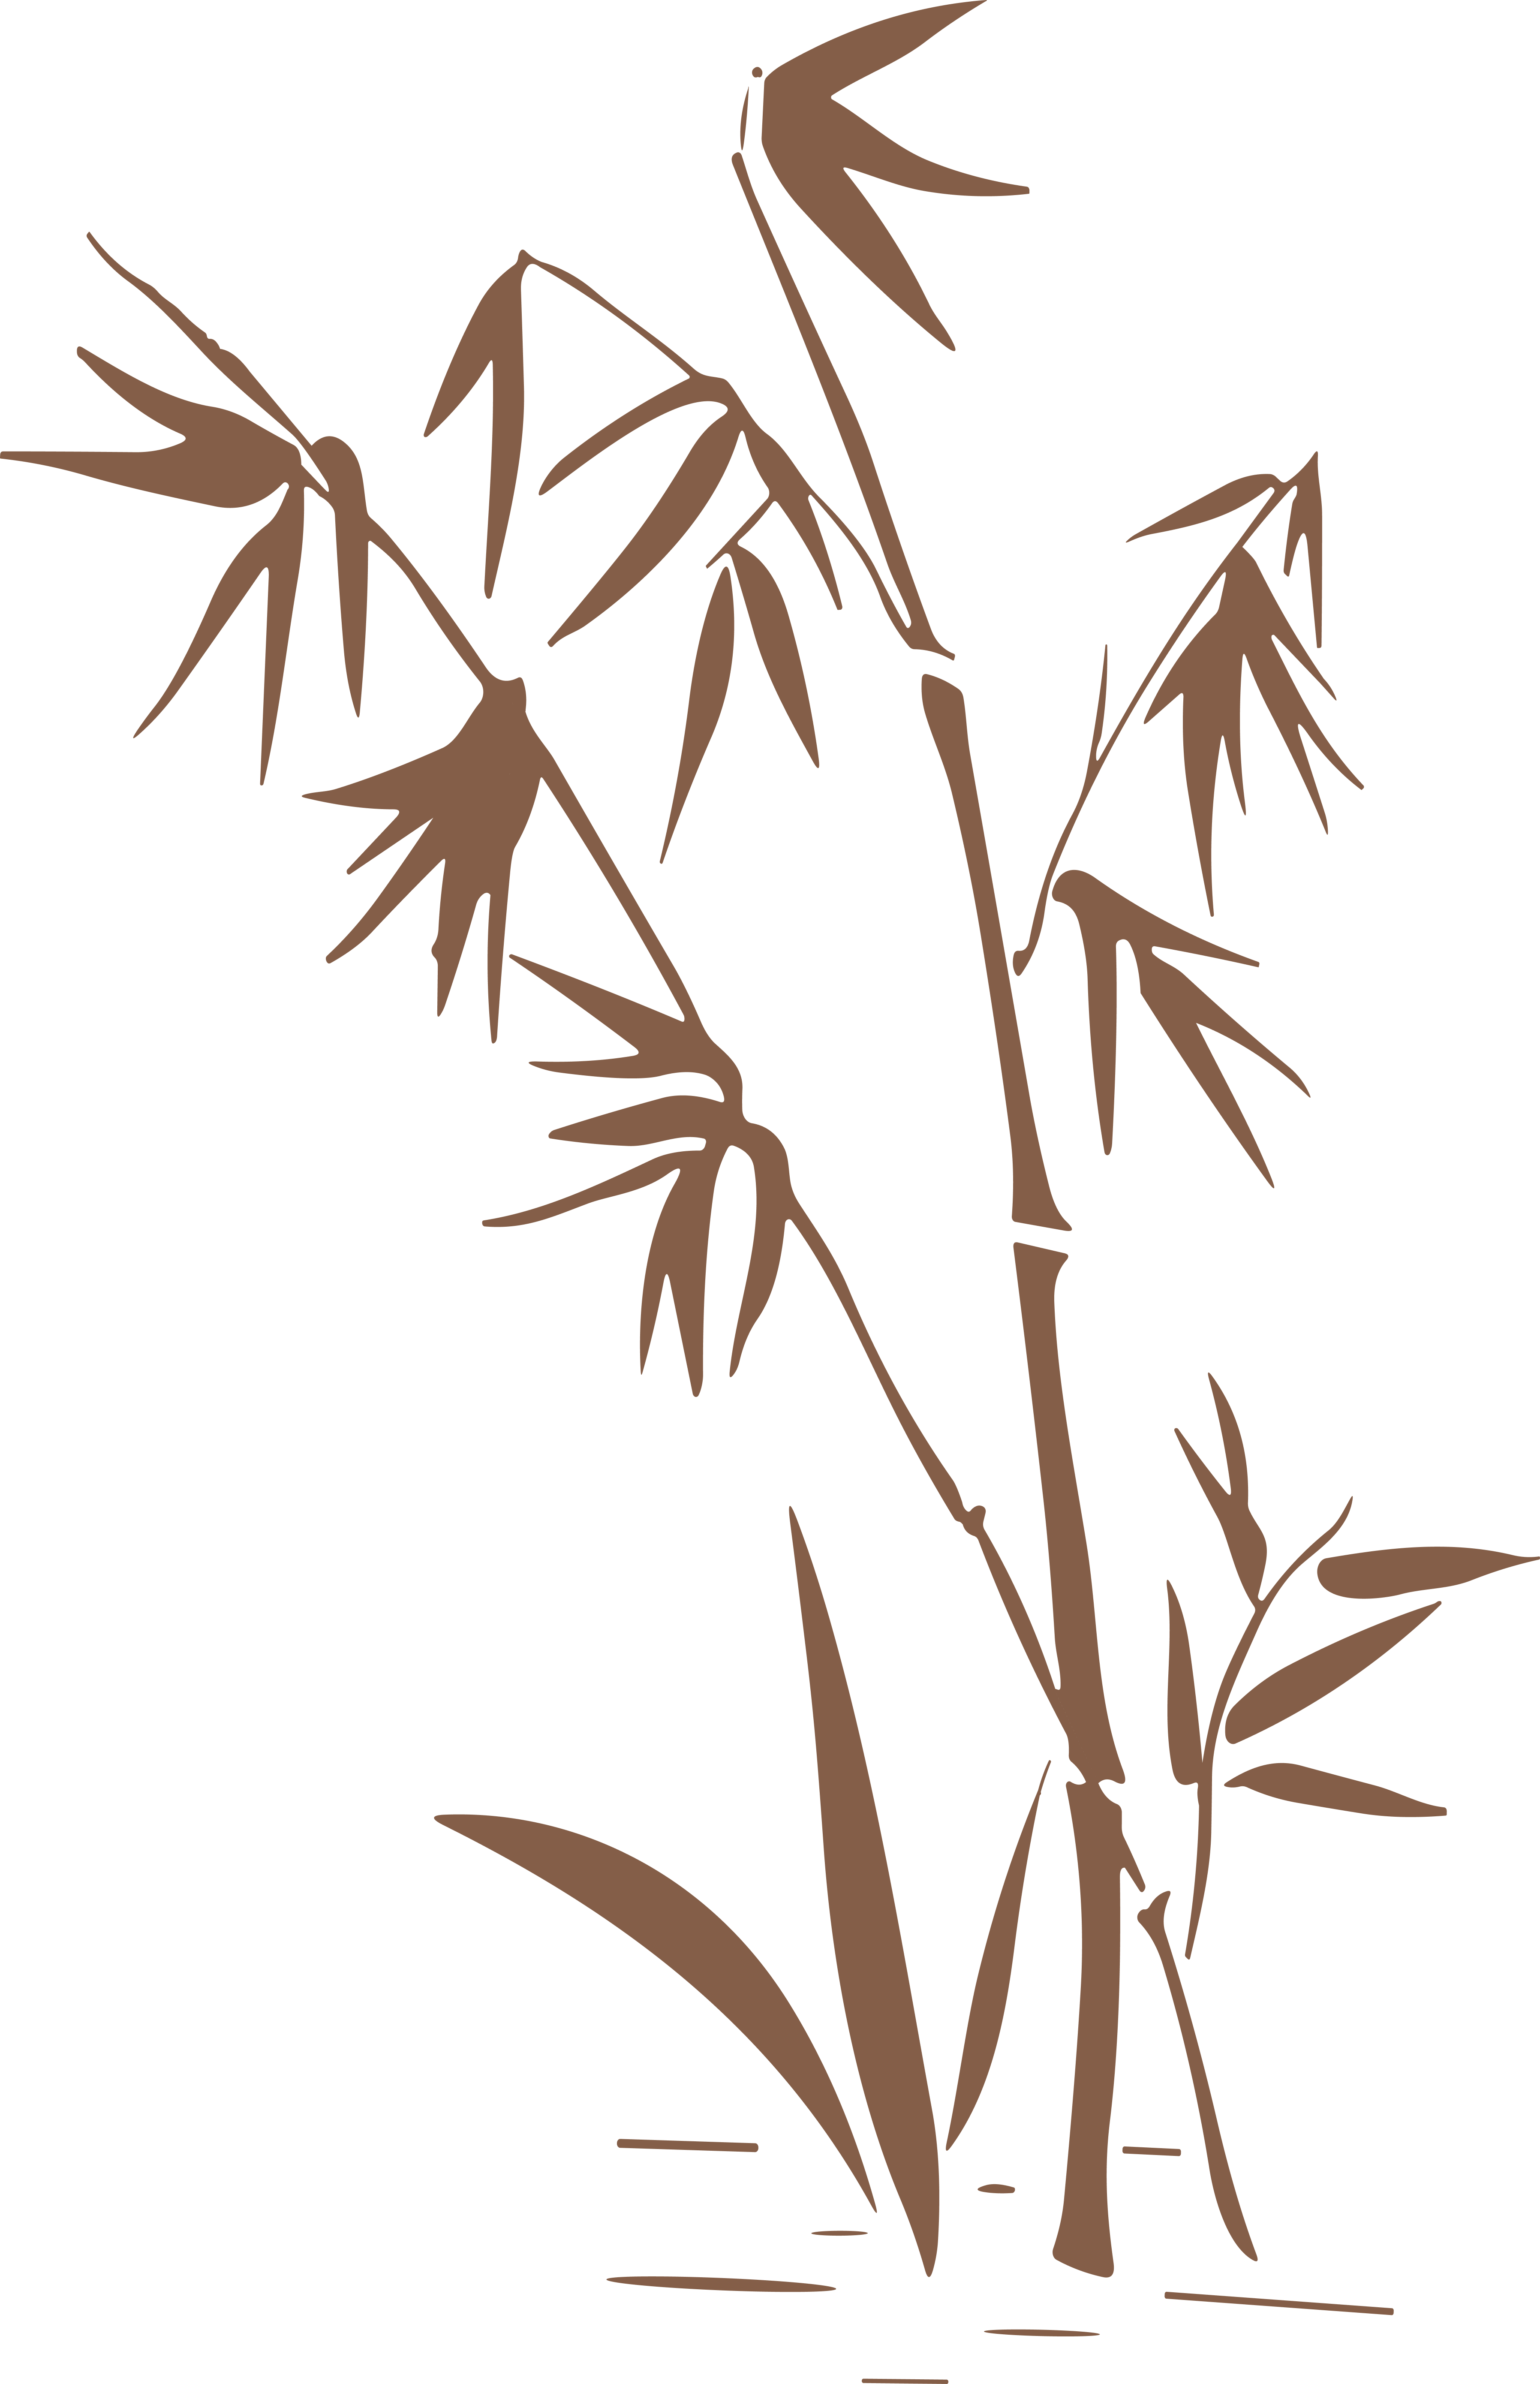 image of a bamboo